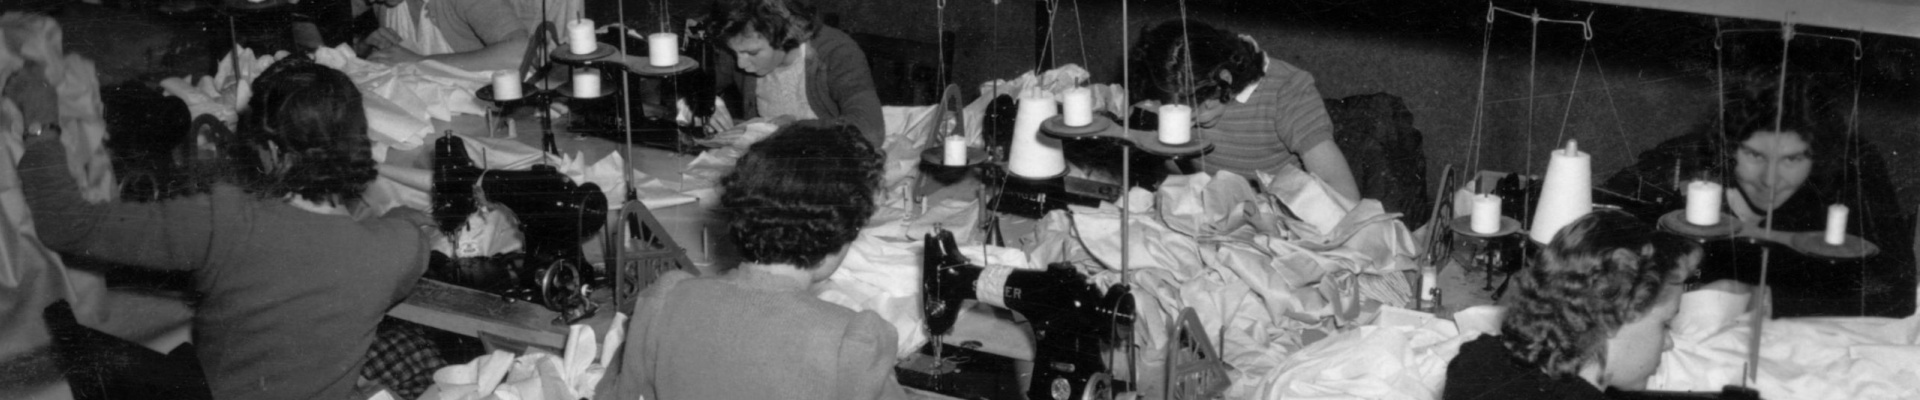 Sewing garments Women clothing workers sewing in the Davidson Clothing Factory Welshpool 8 September 1949